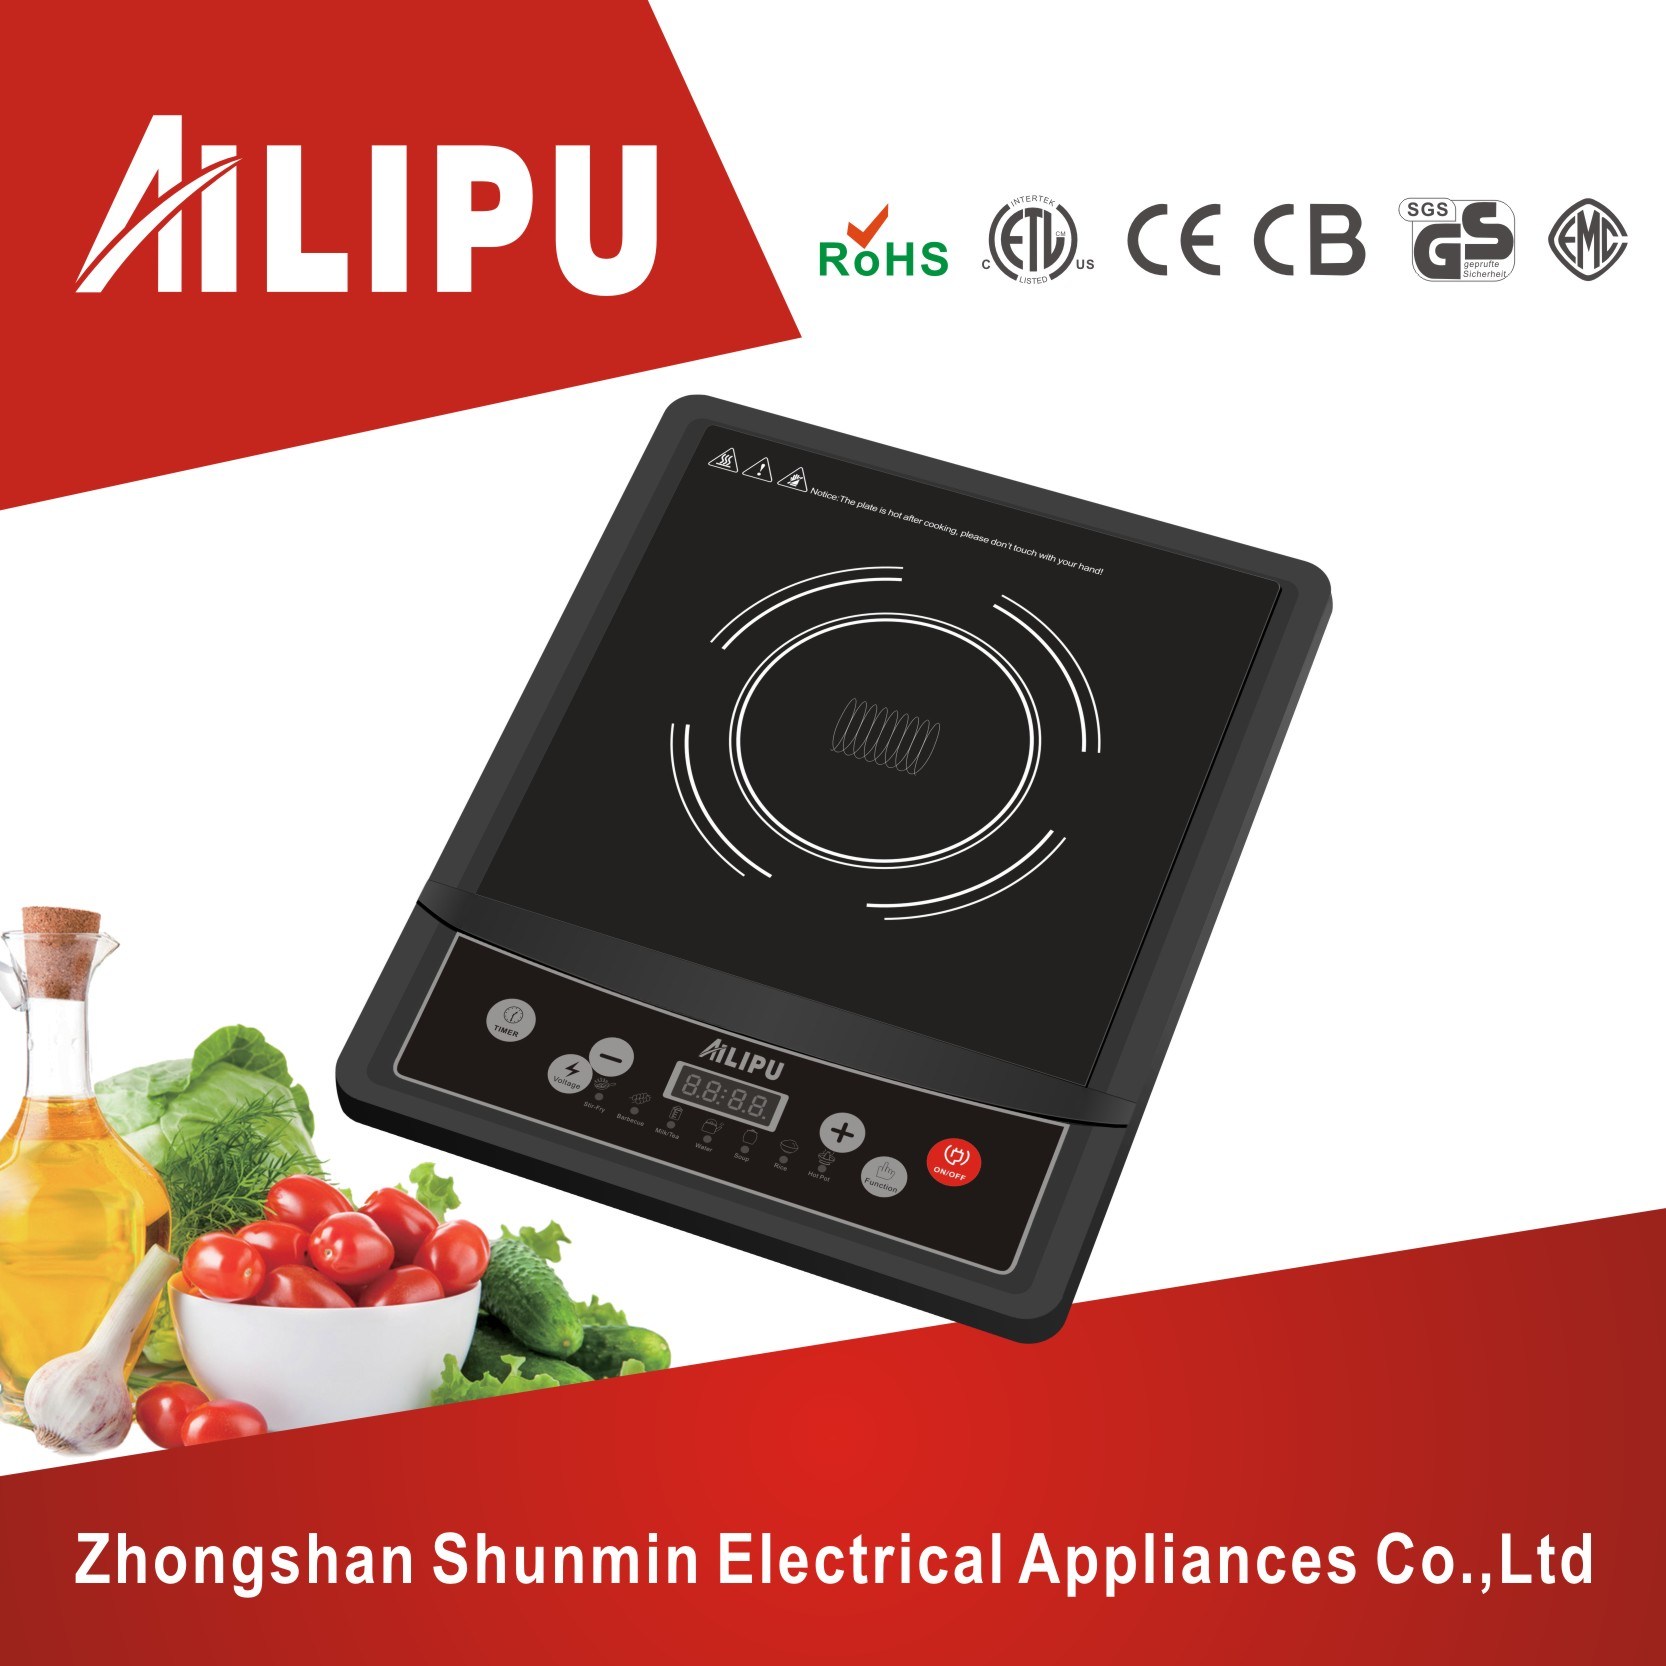 Low Price with CE/CB Certificated European Pushbutton Induction Cooker (SM-A57)